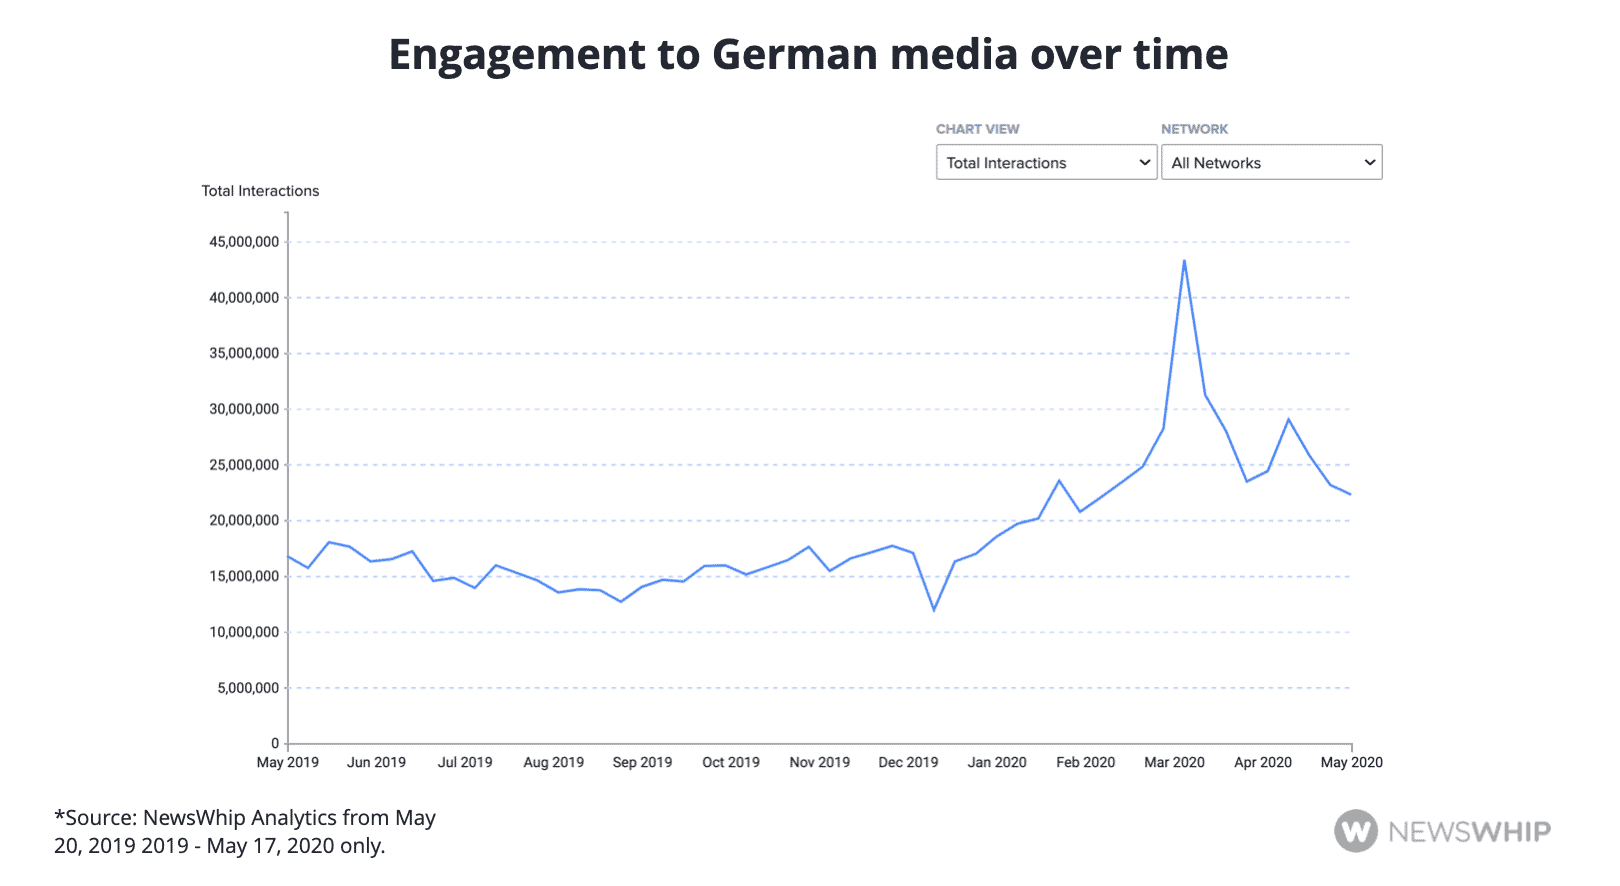 Line graph showing engagement to German content over time